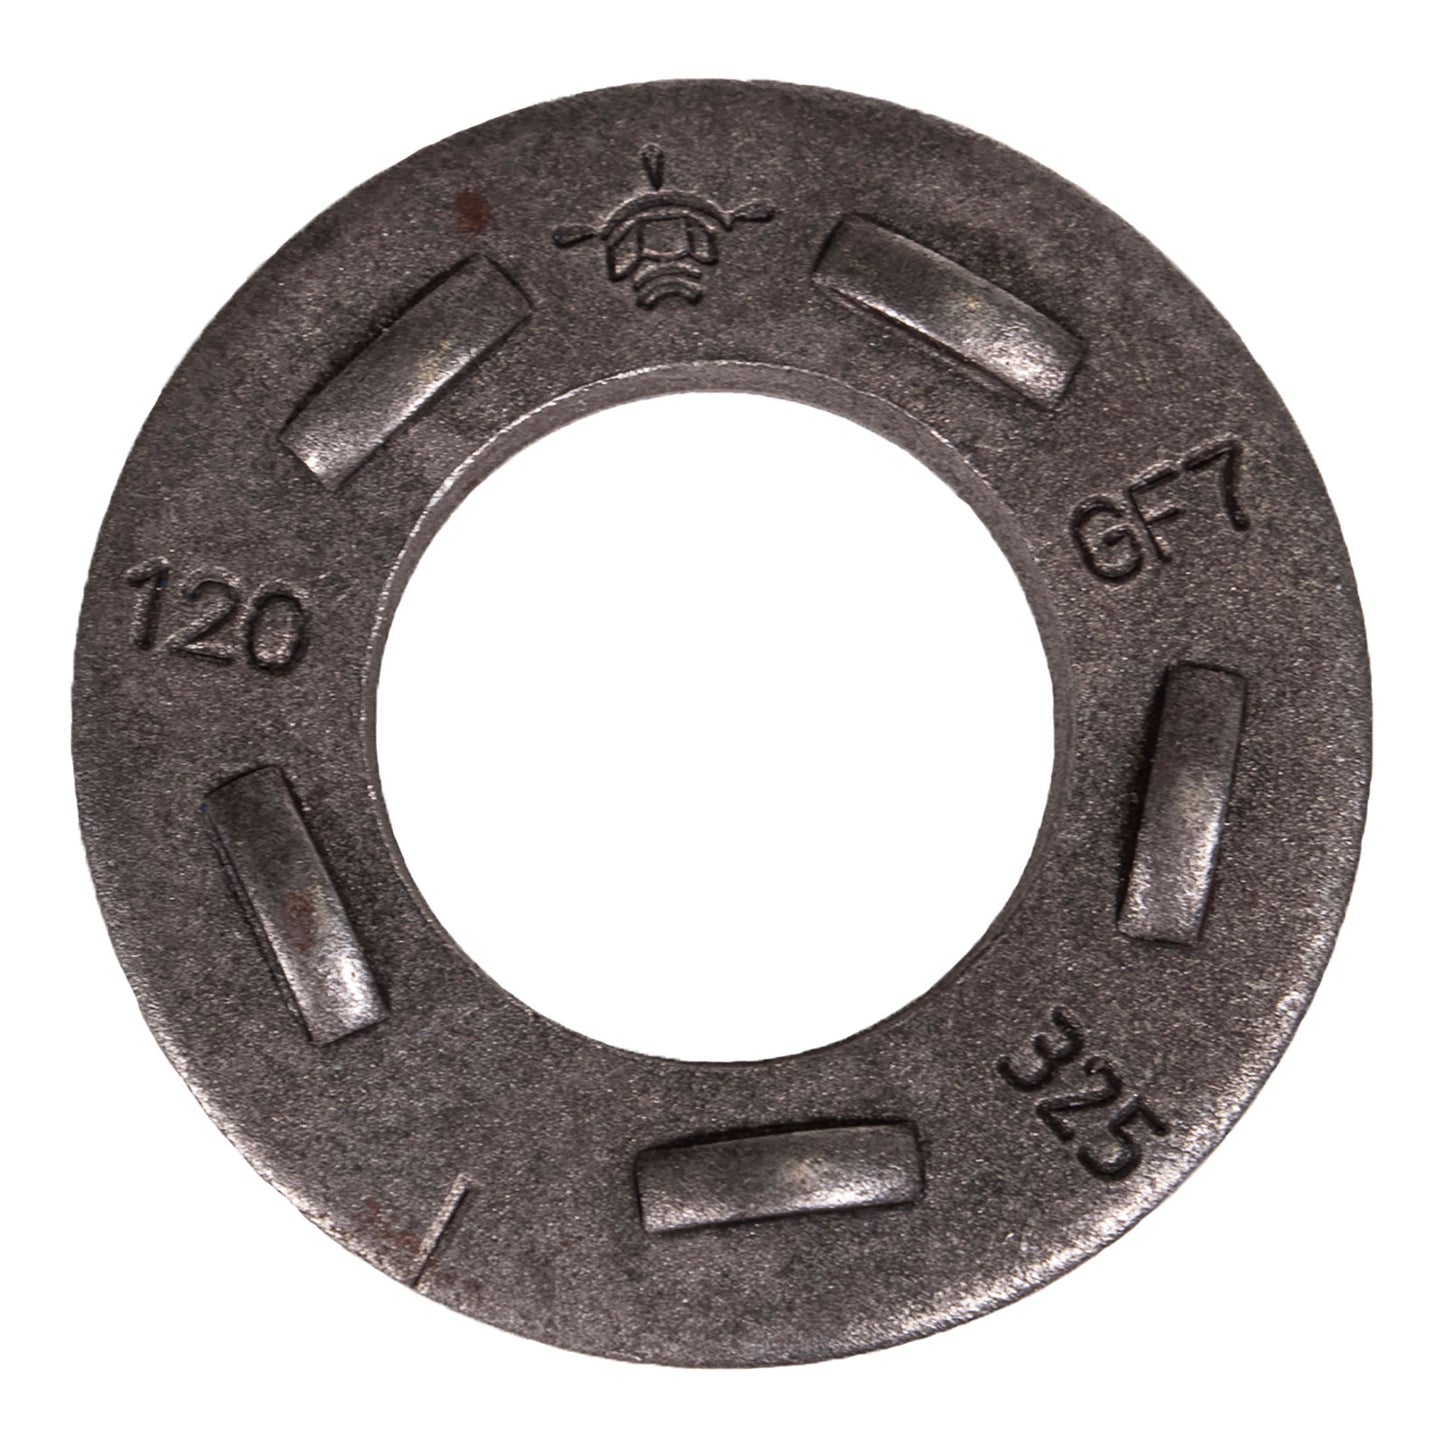 7/8" Conquest DTI Flat Washer 